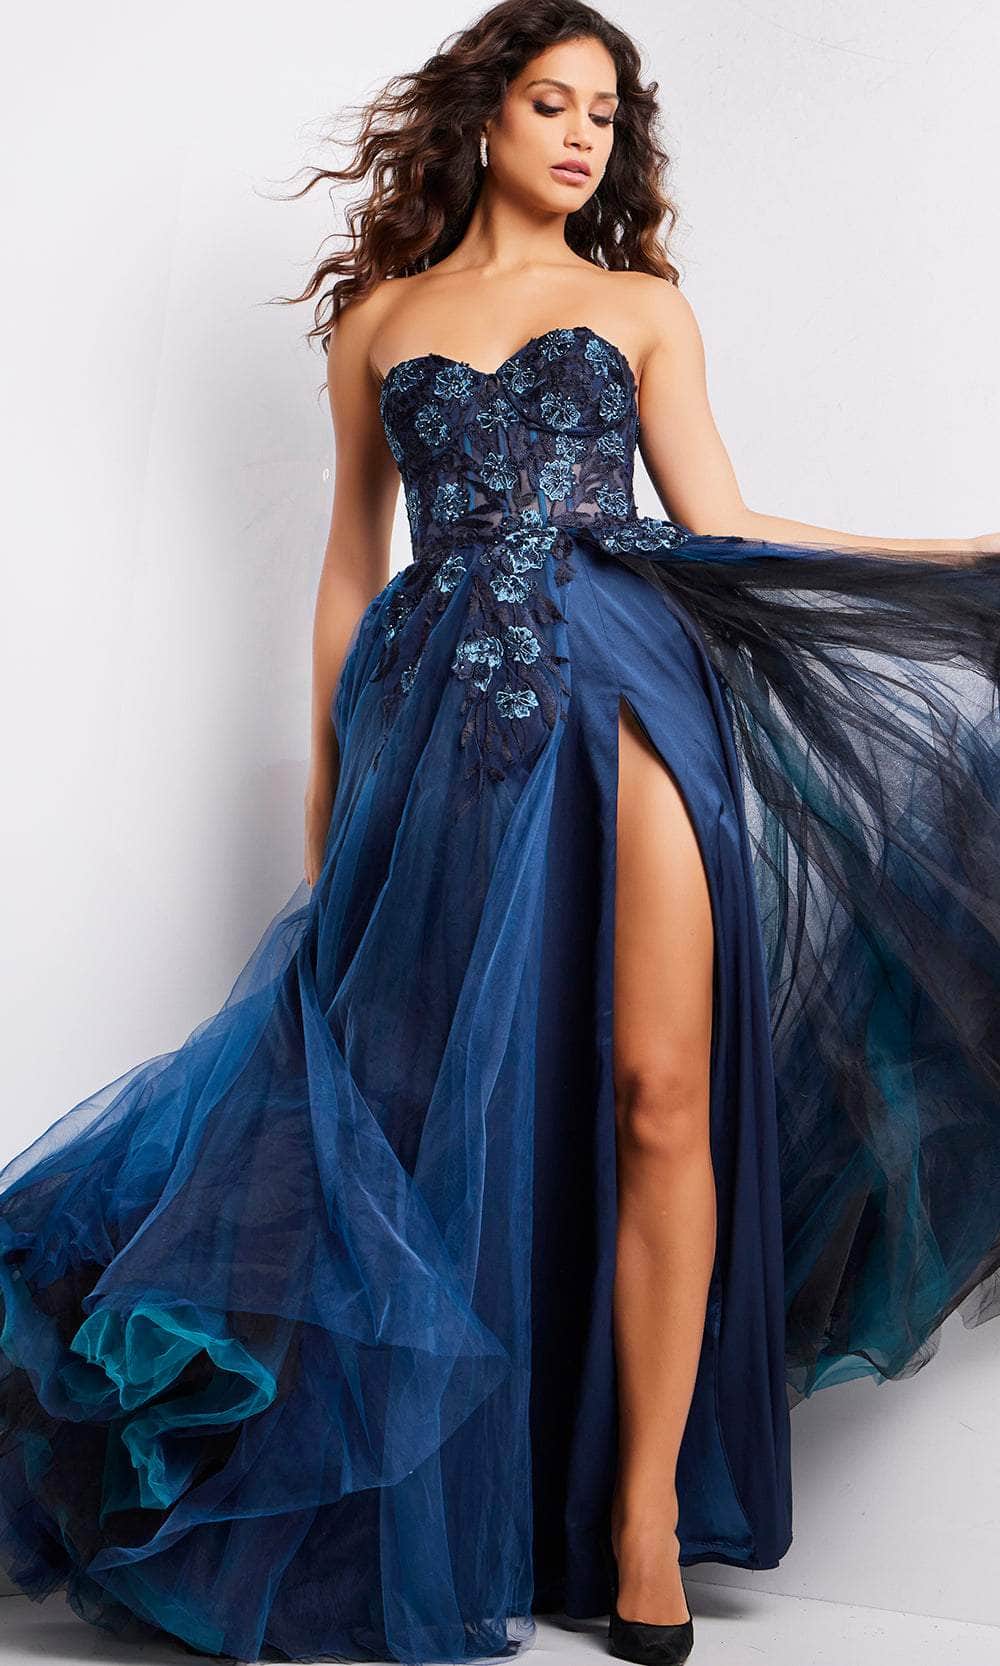 Image of Jovani 23641 - Floral Embroidered Strapless Dress